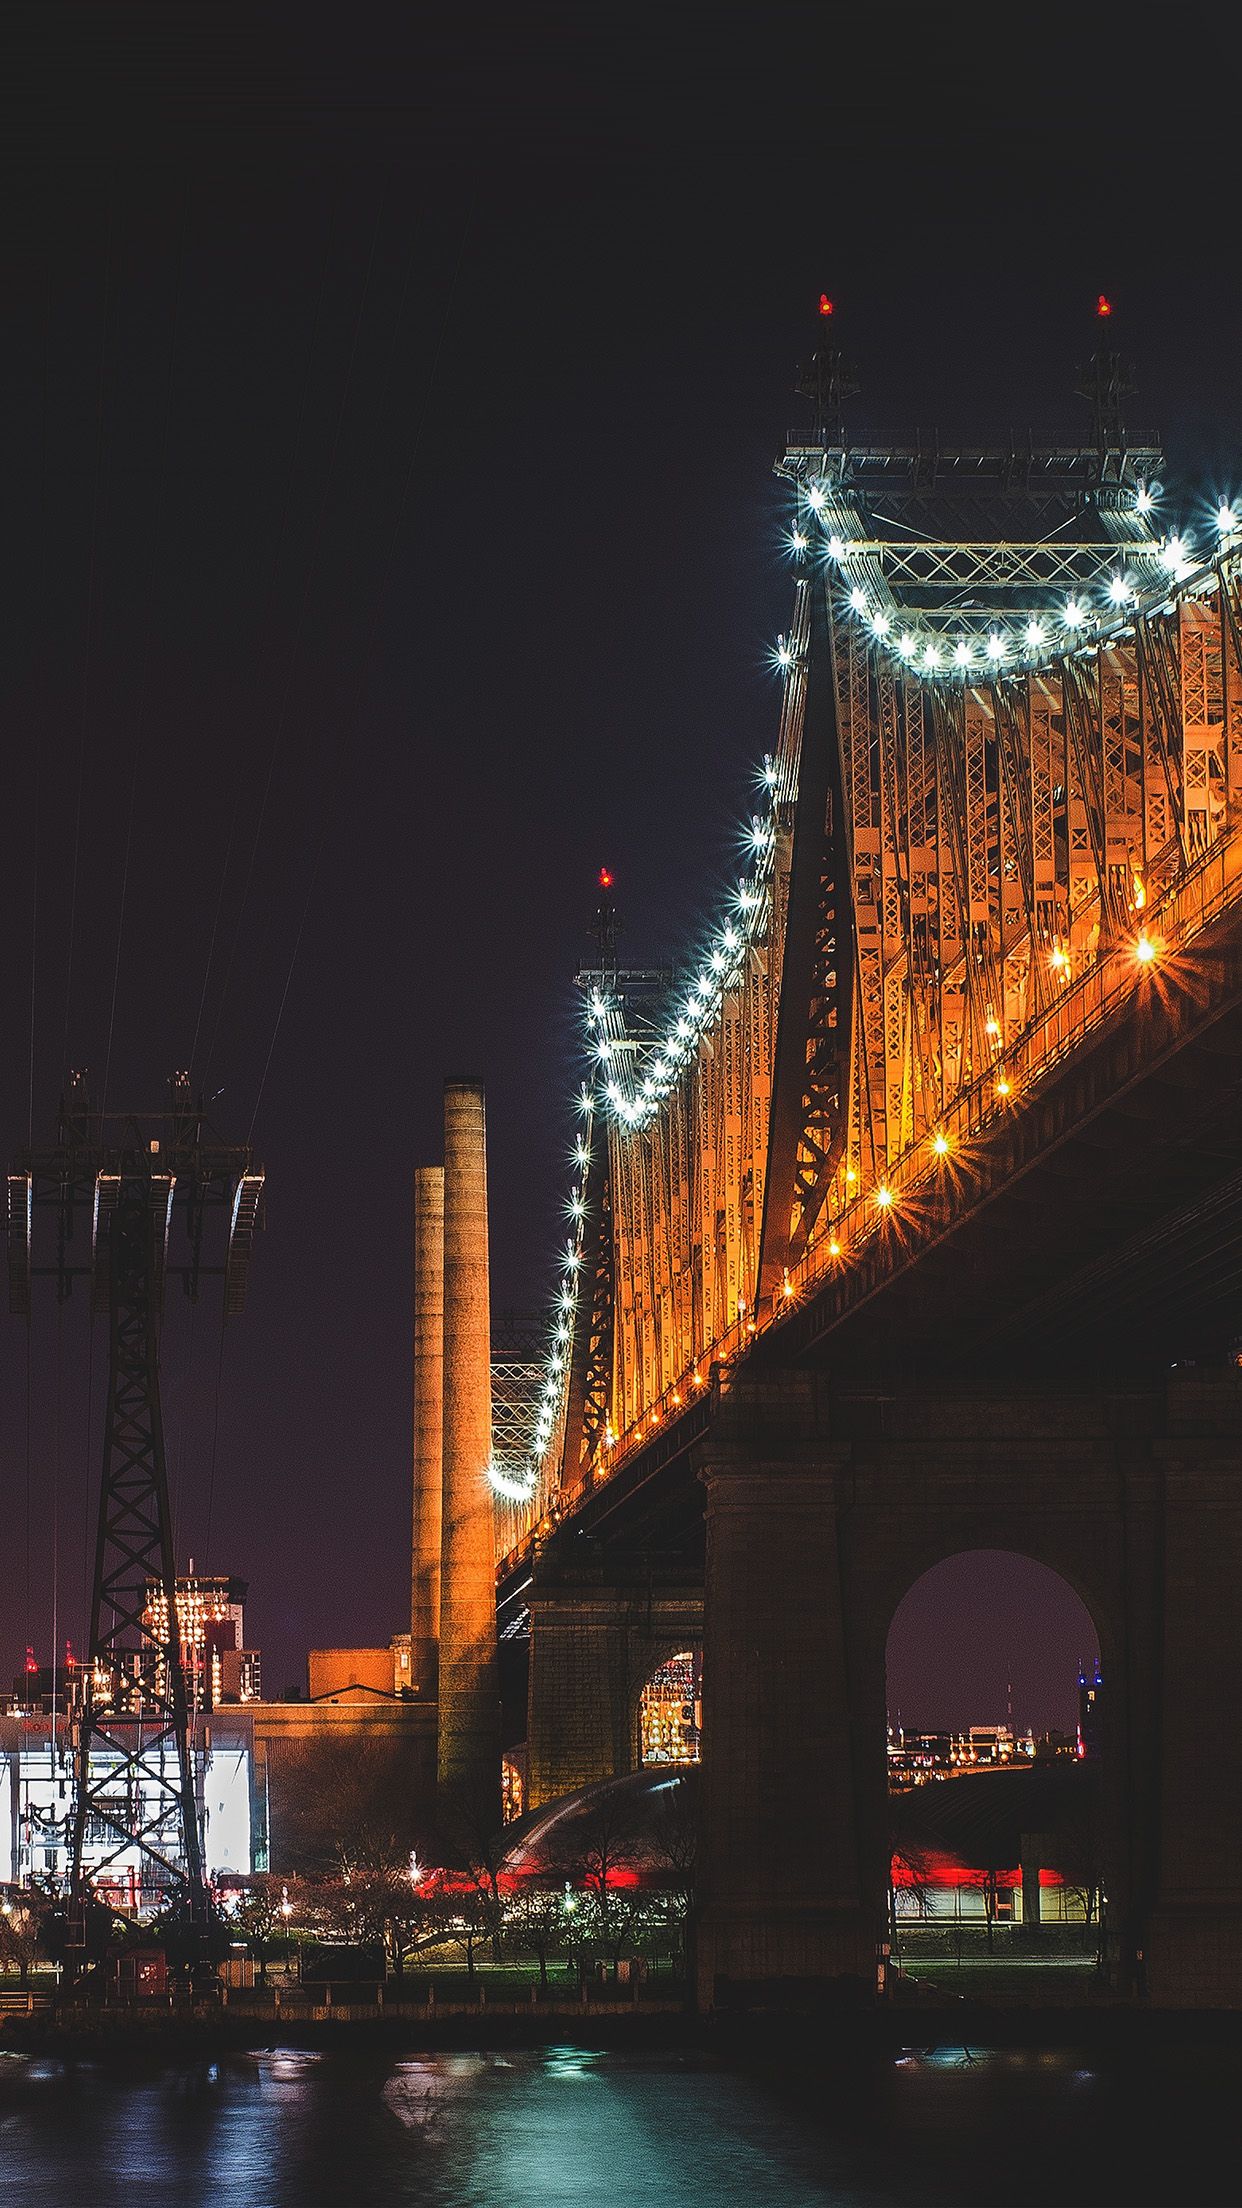 A night time view of the Queensboro Bridge, which connects Long Island City to Roosevelt Island. - City